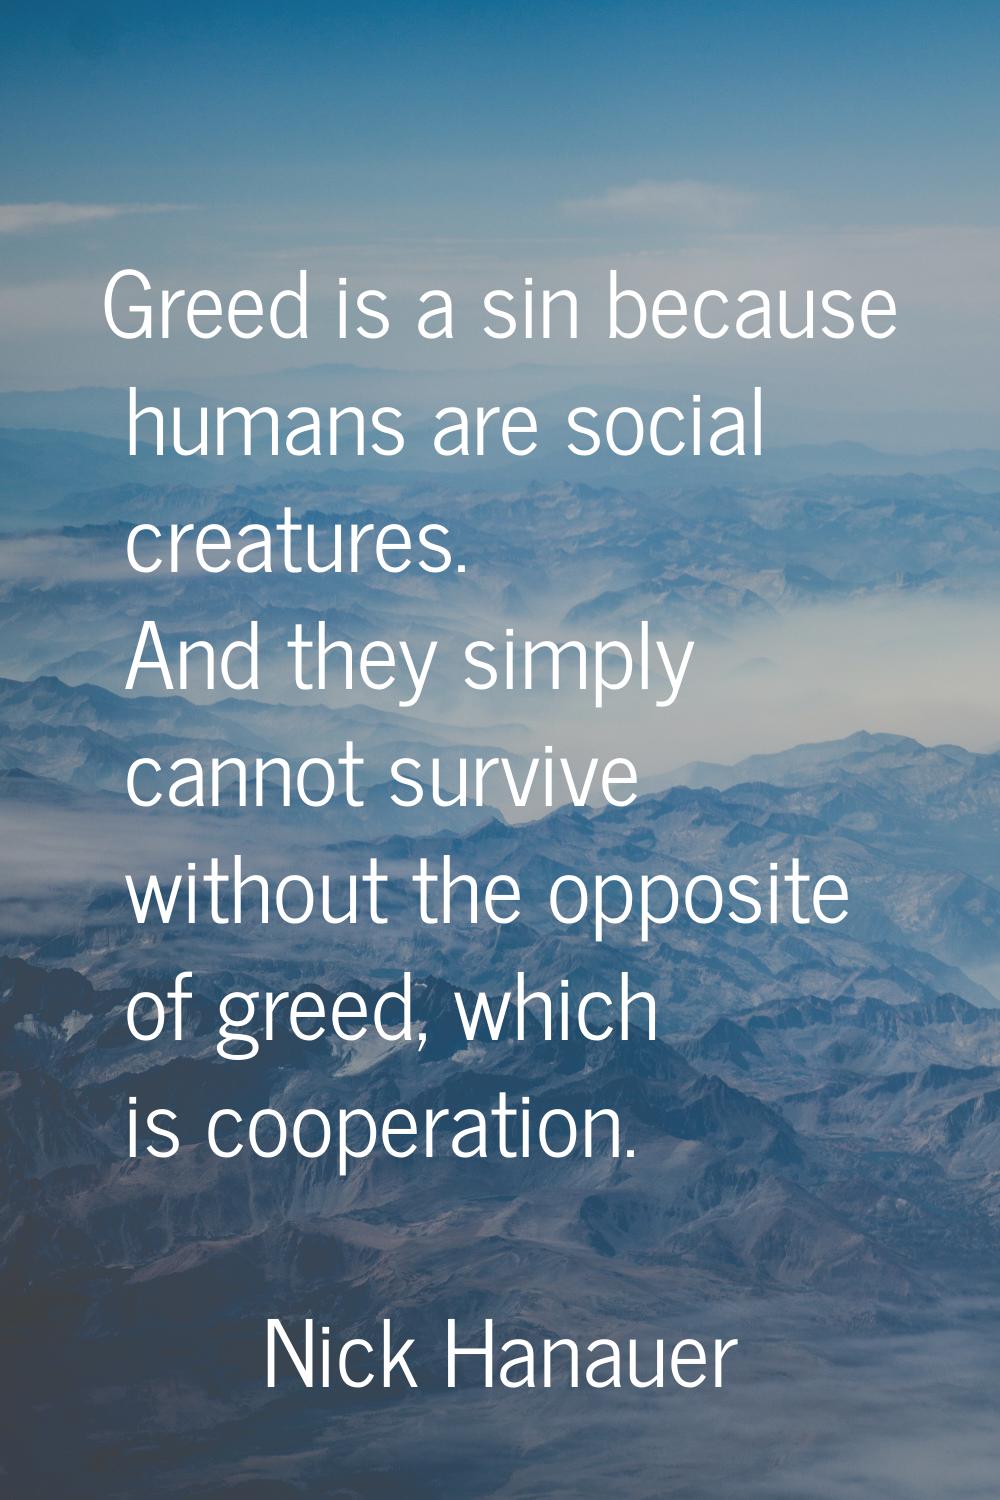 Greed is a sin because humans are social creatures. And they simply cannot survive without the oppo